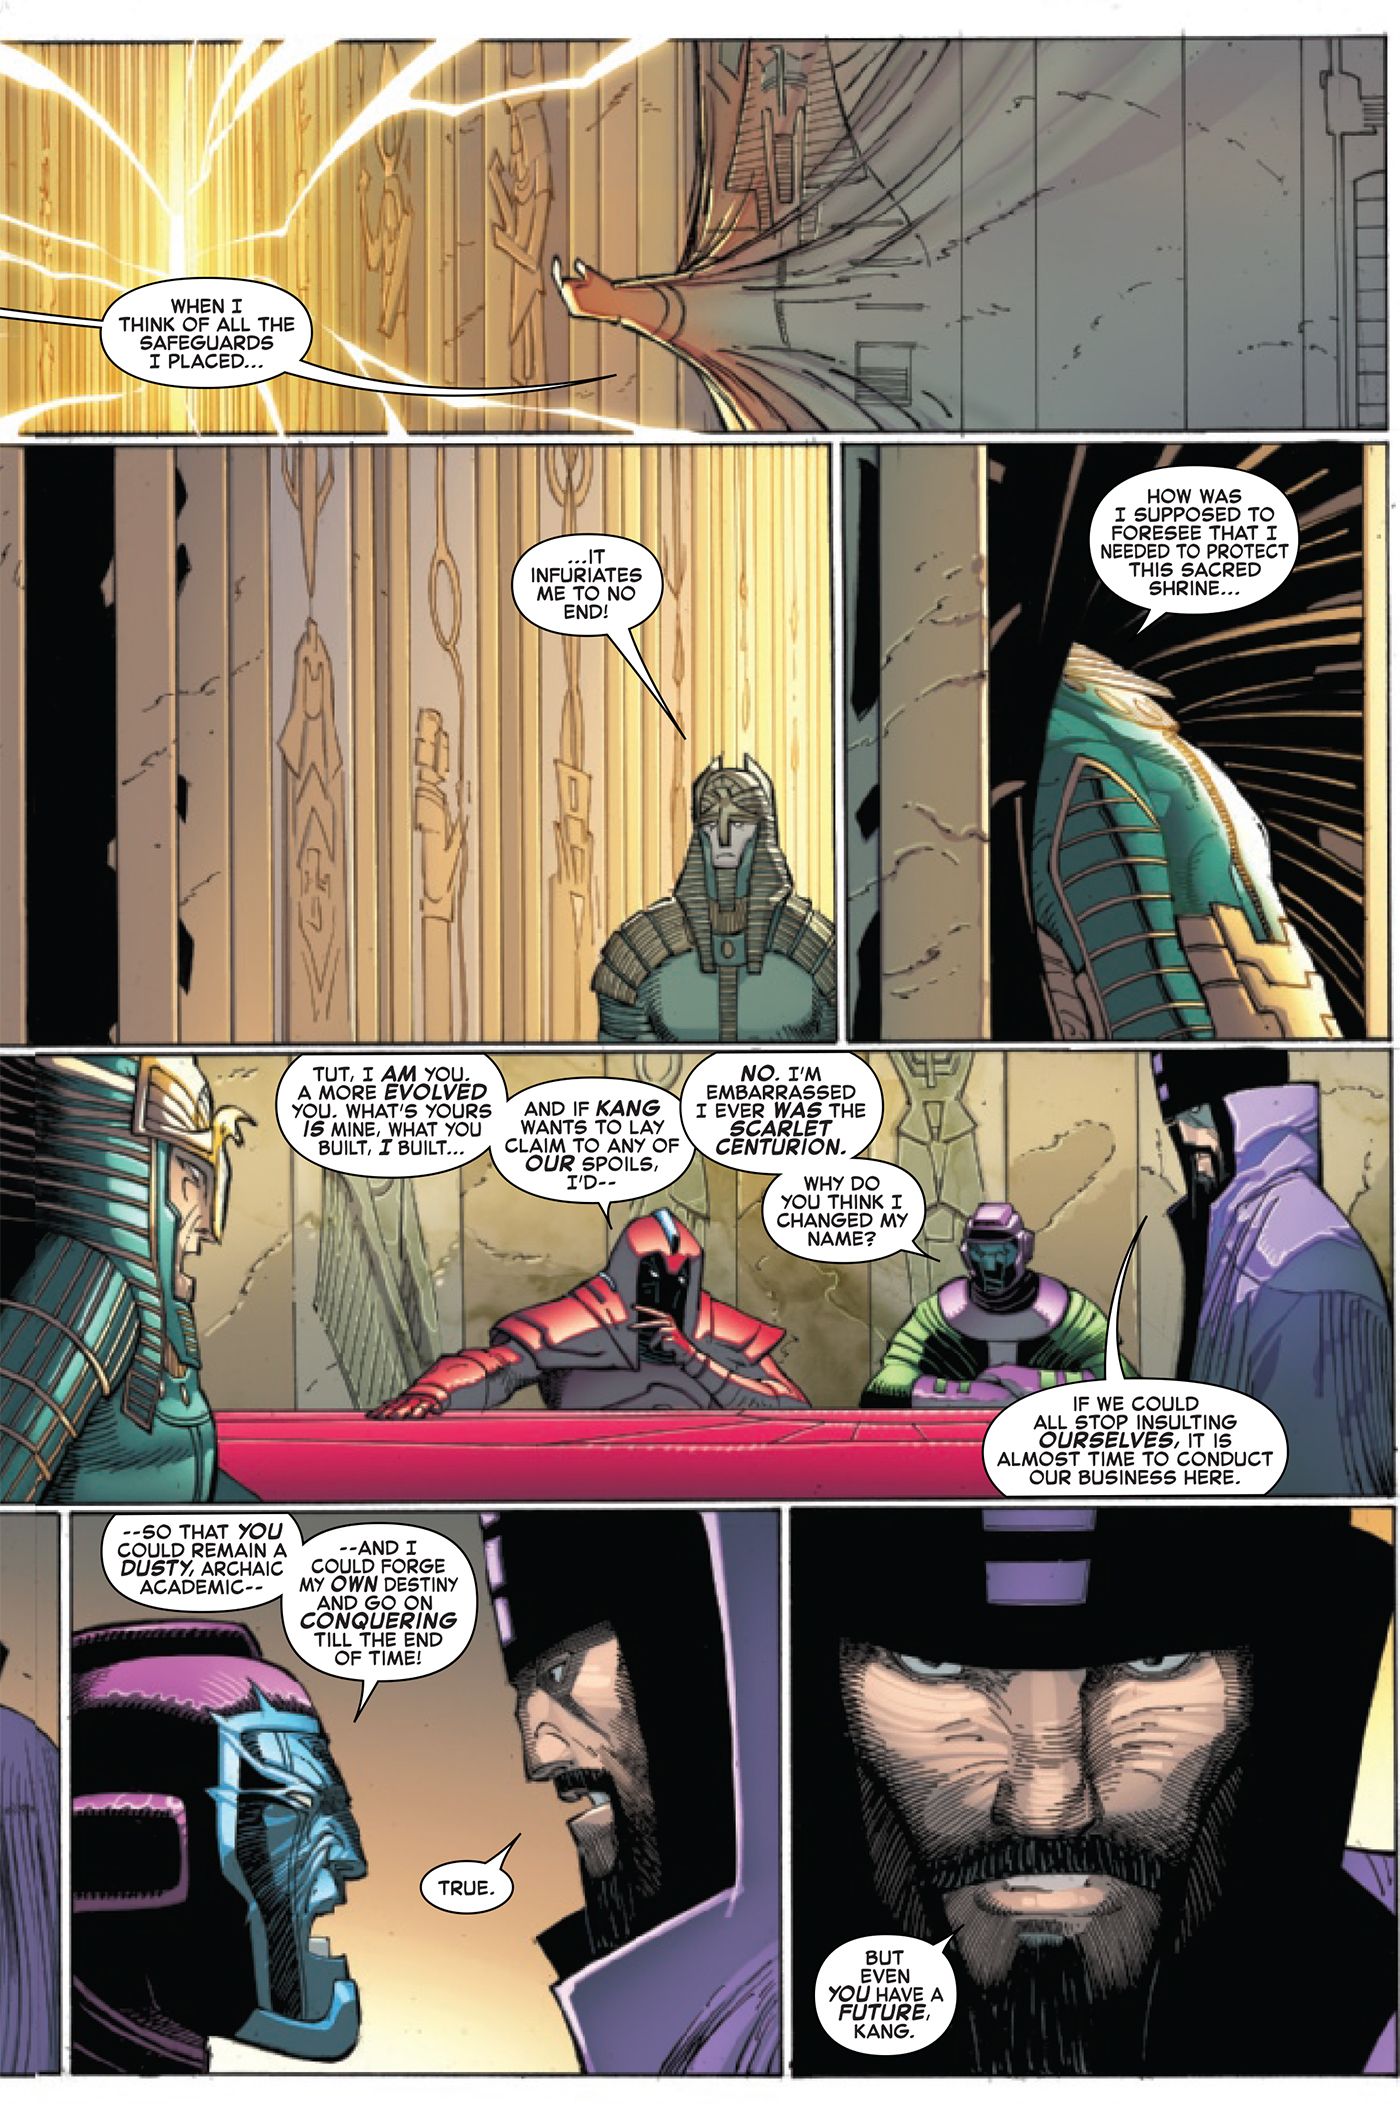 The Kang variants argue amongst one another.